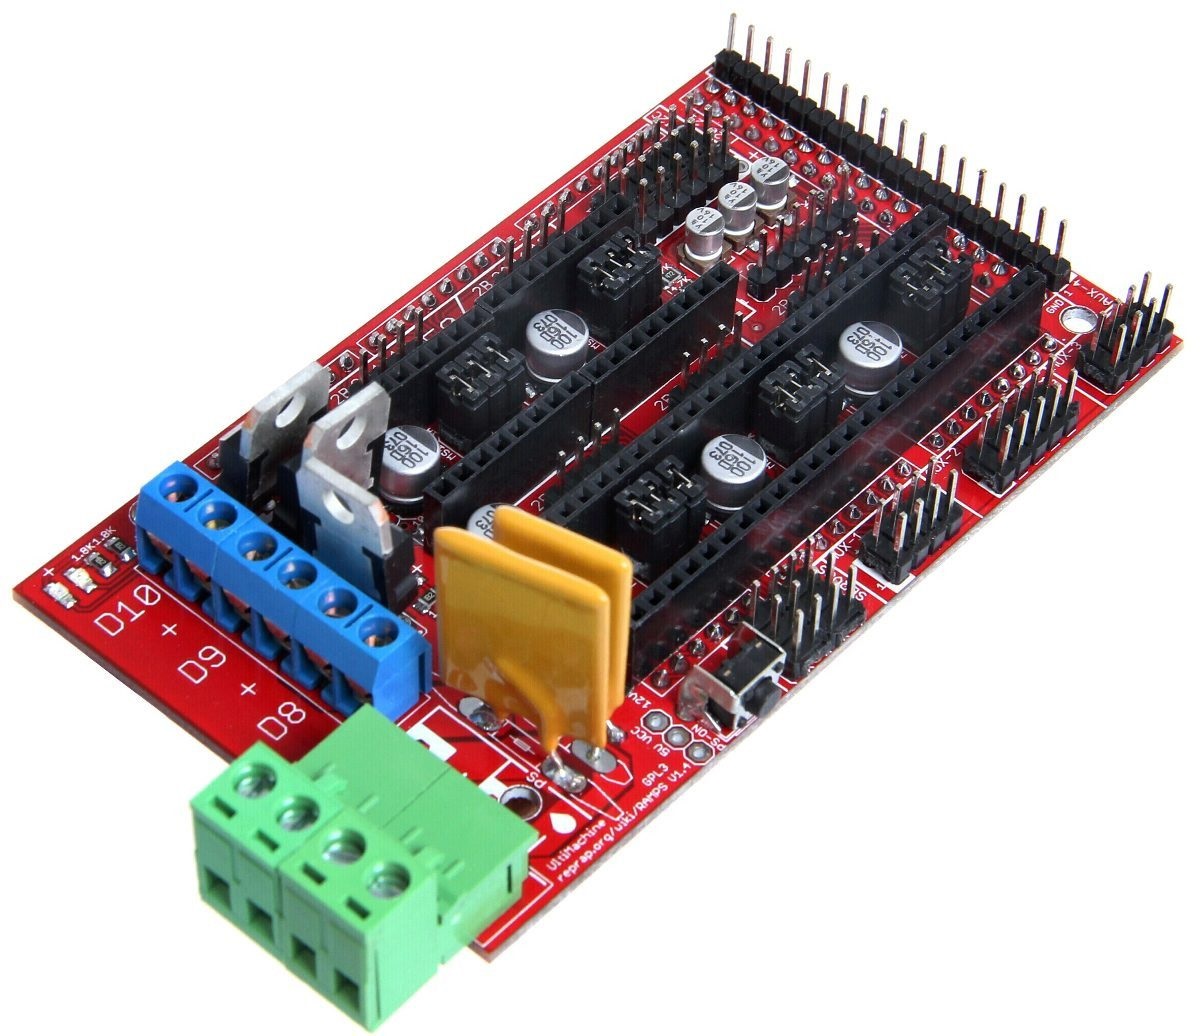 Ramps 1.4 3D Printer Controller+5Pcs Drv8825 Driver With Heat Sink Kit (Robu.in)